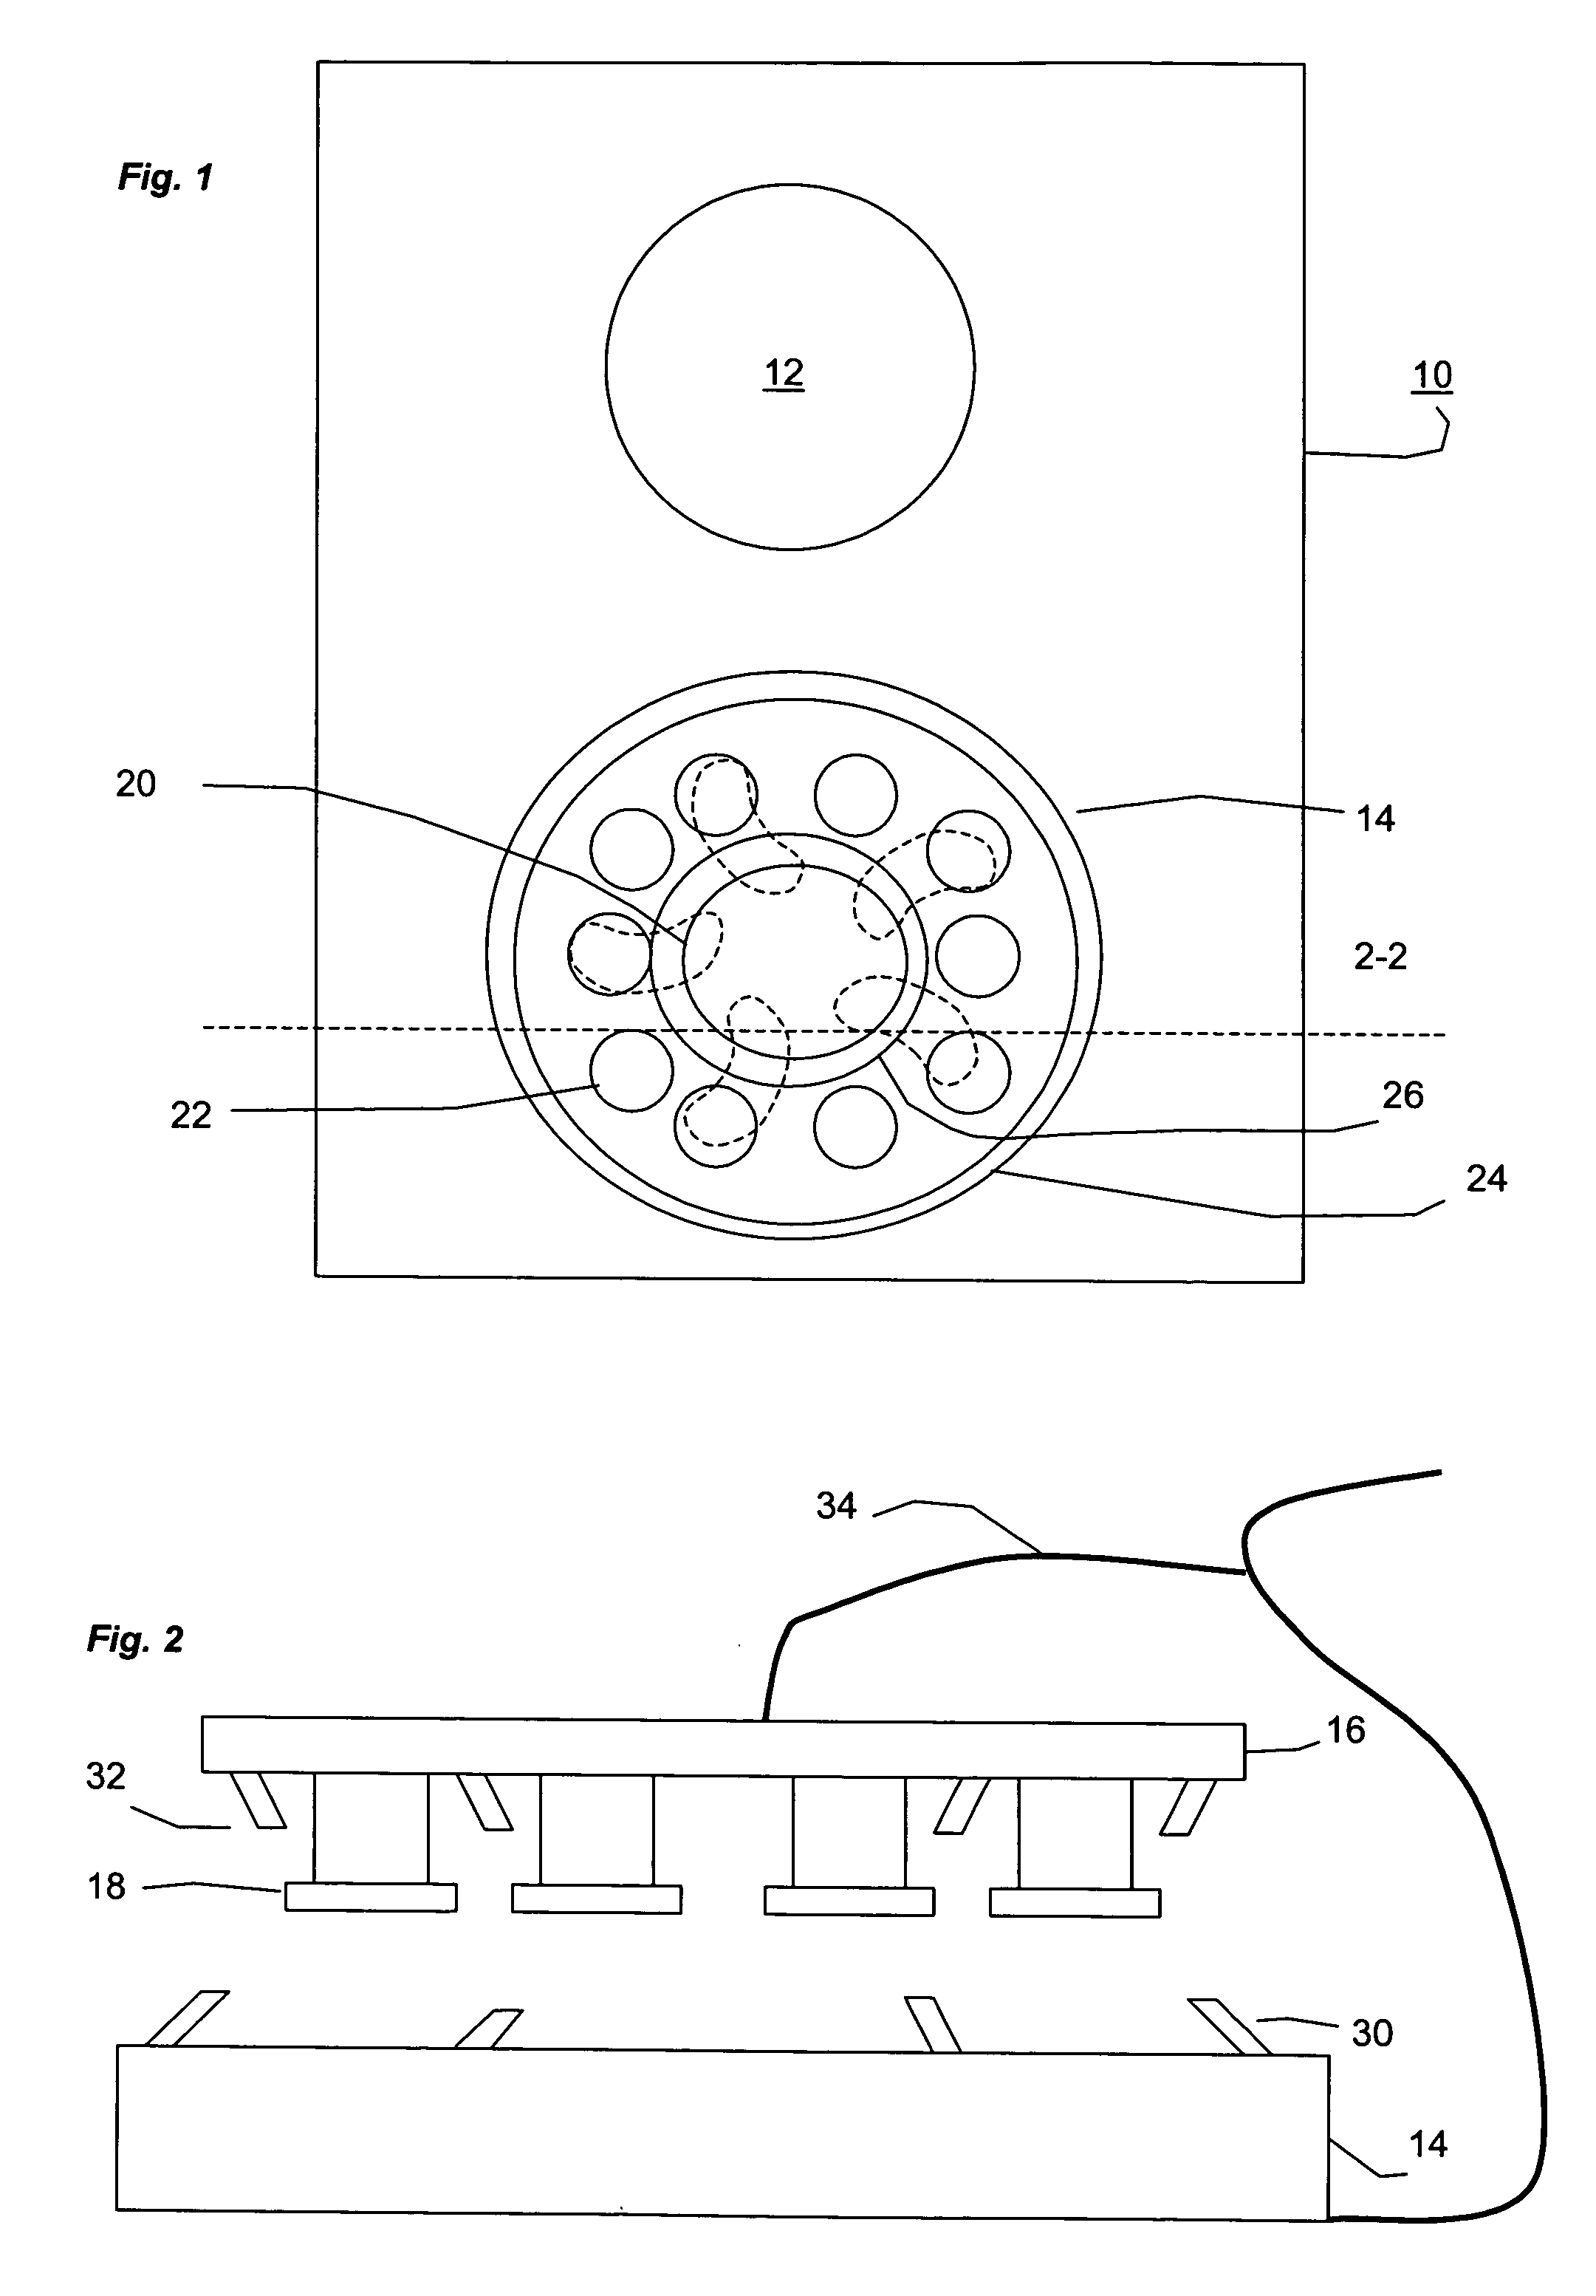 Method and apparatus for cleaning slurry depositions from a water carrier